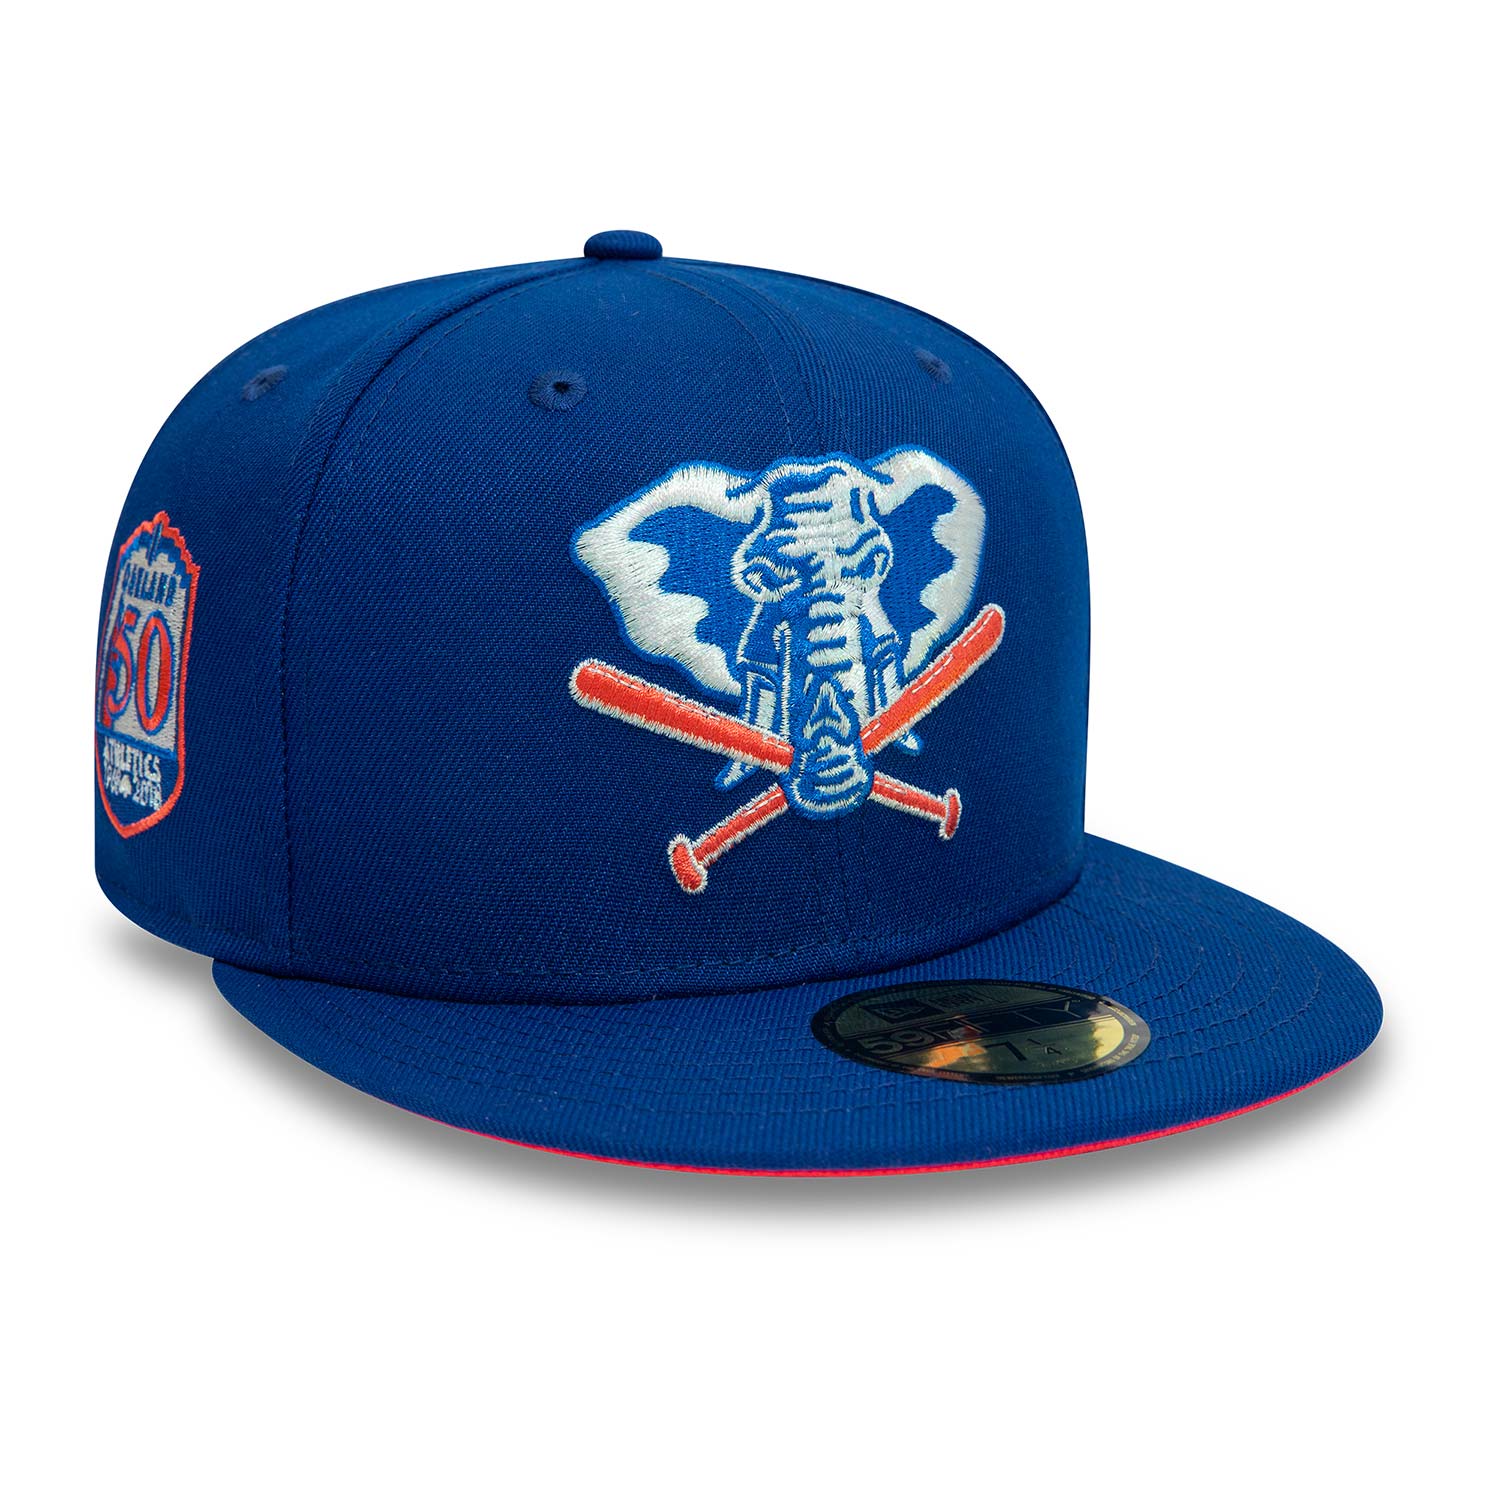 Oakland Athletics New Era 59FIFTY Fitted Hat - Royal